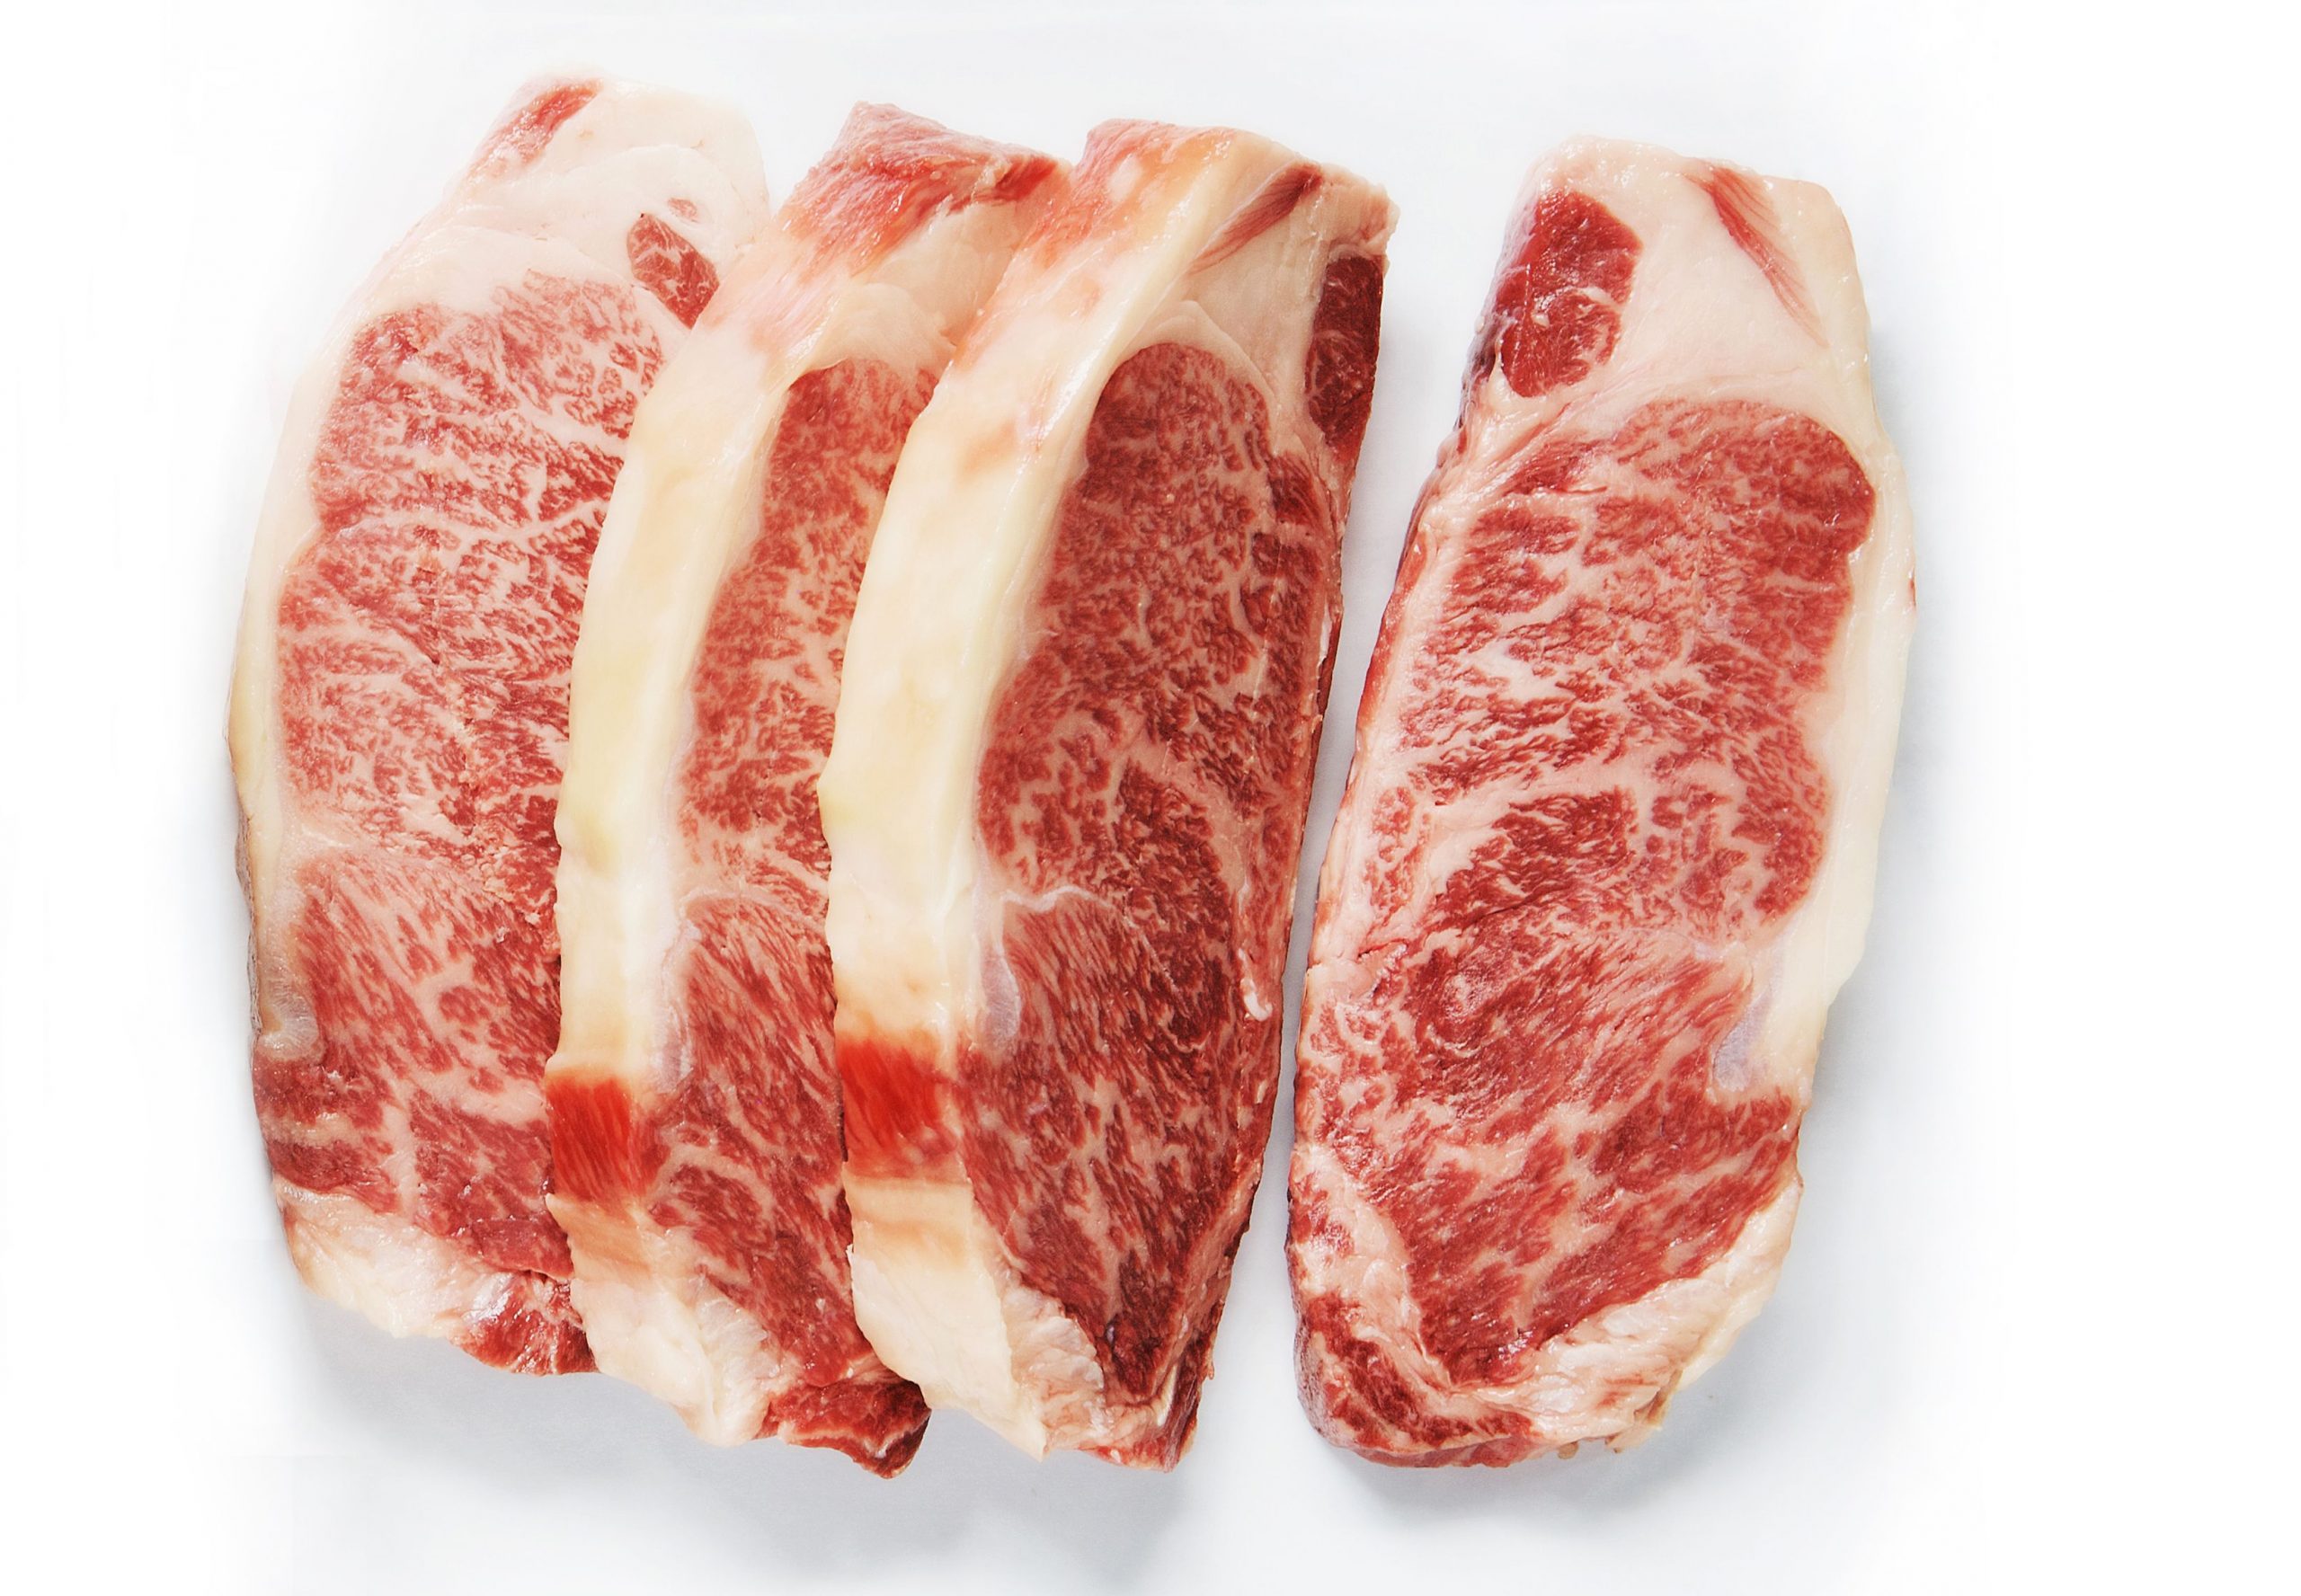 Wagyu Beef And Steaks For Sale Online